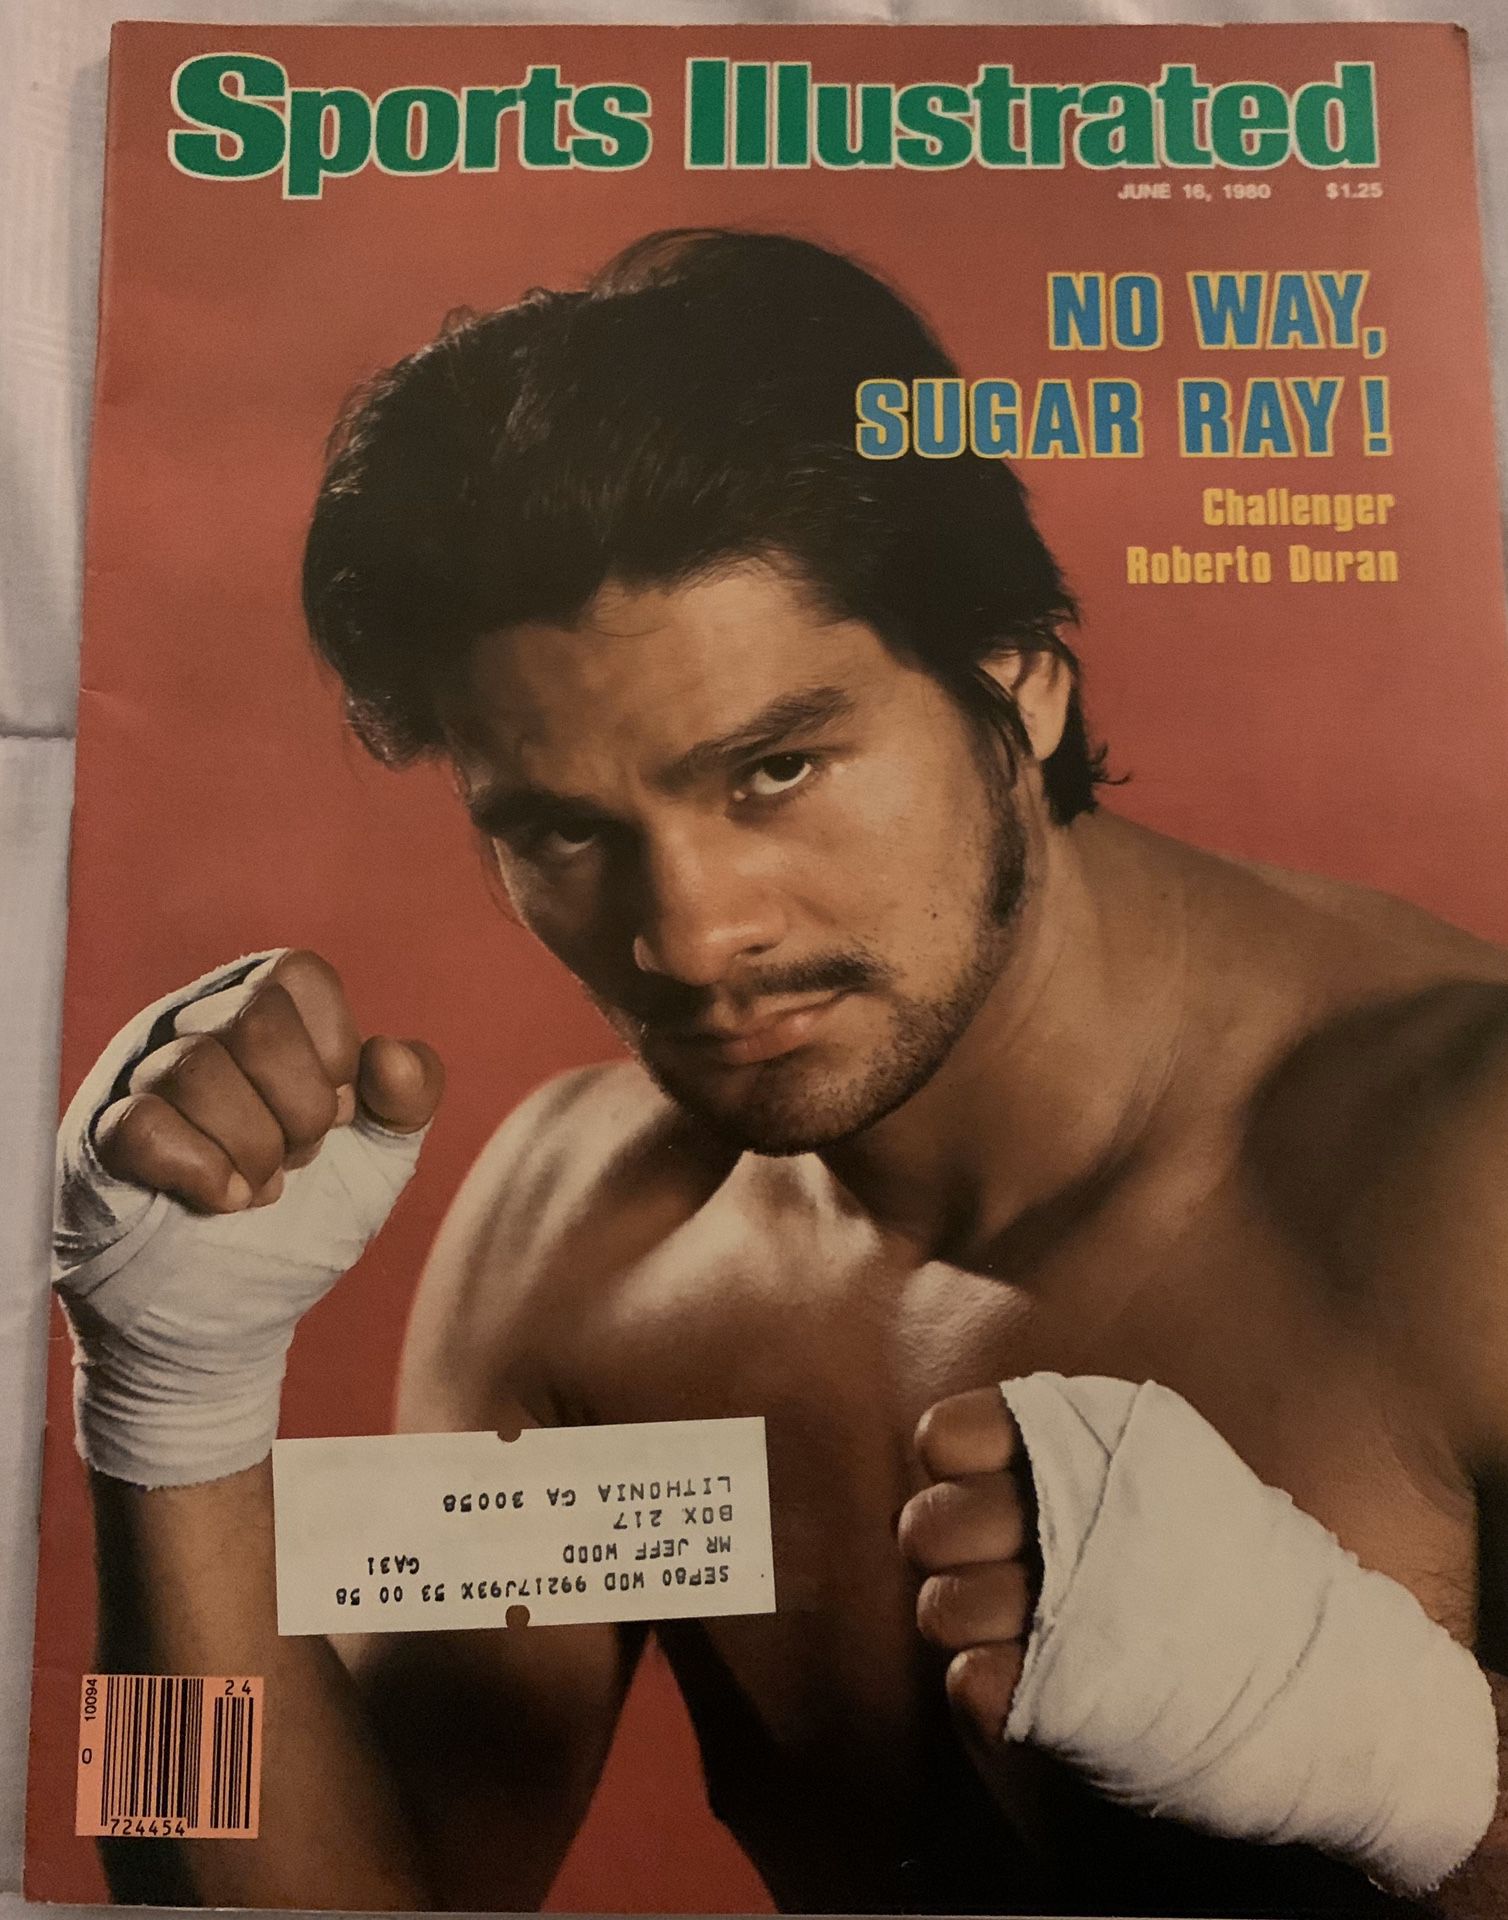 ROBERTO DURAN cover Sports Illustrated magazine from 1980.